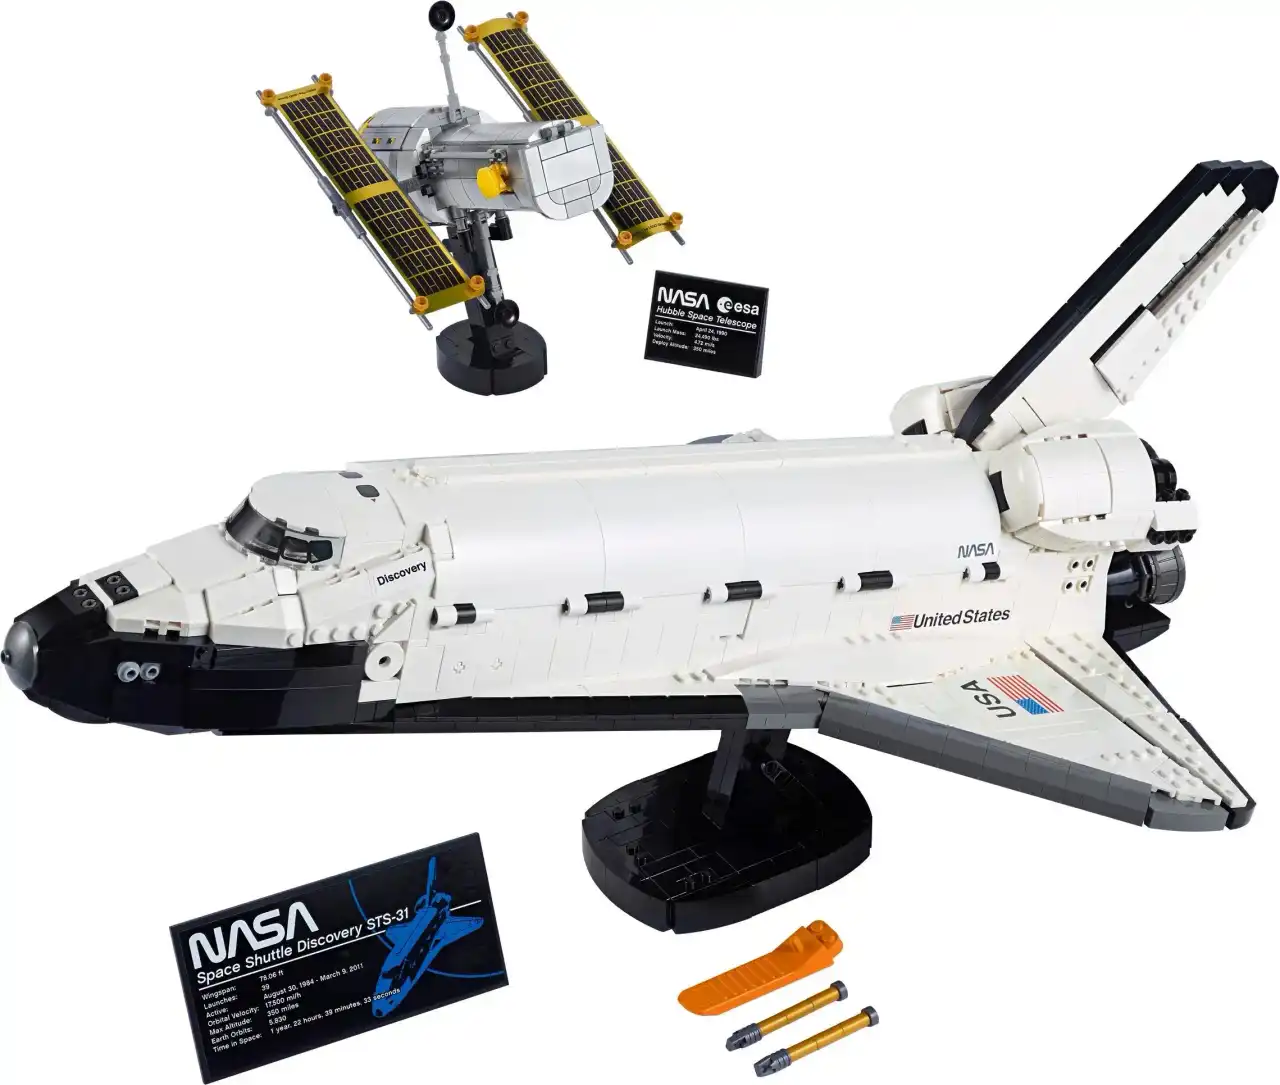 10283 - NASA Space Shuttle Discovery